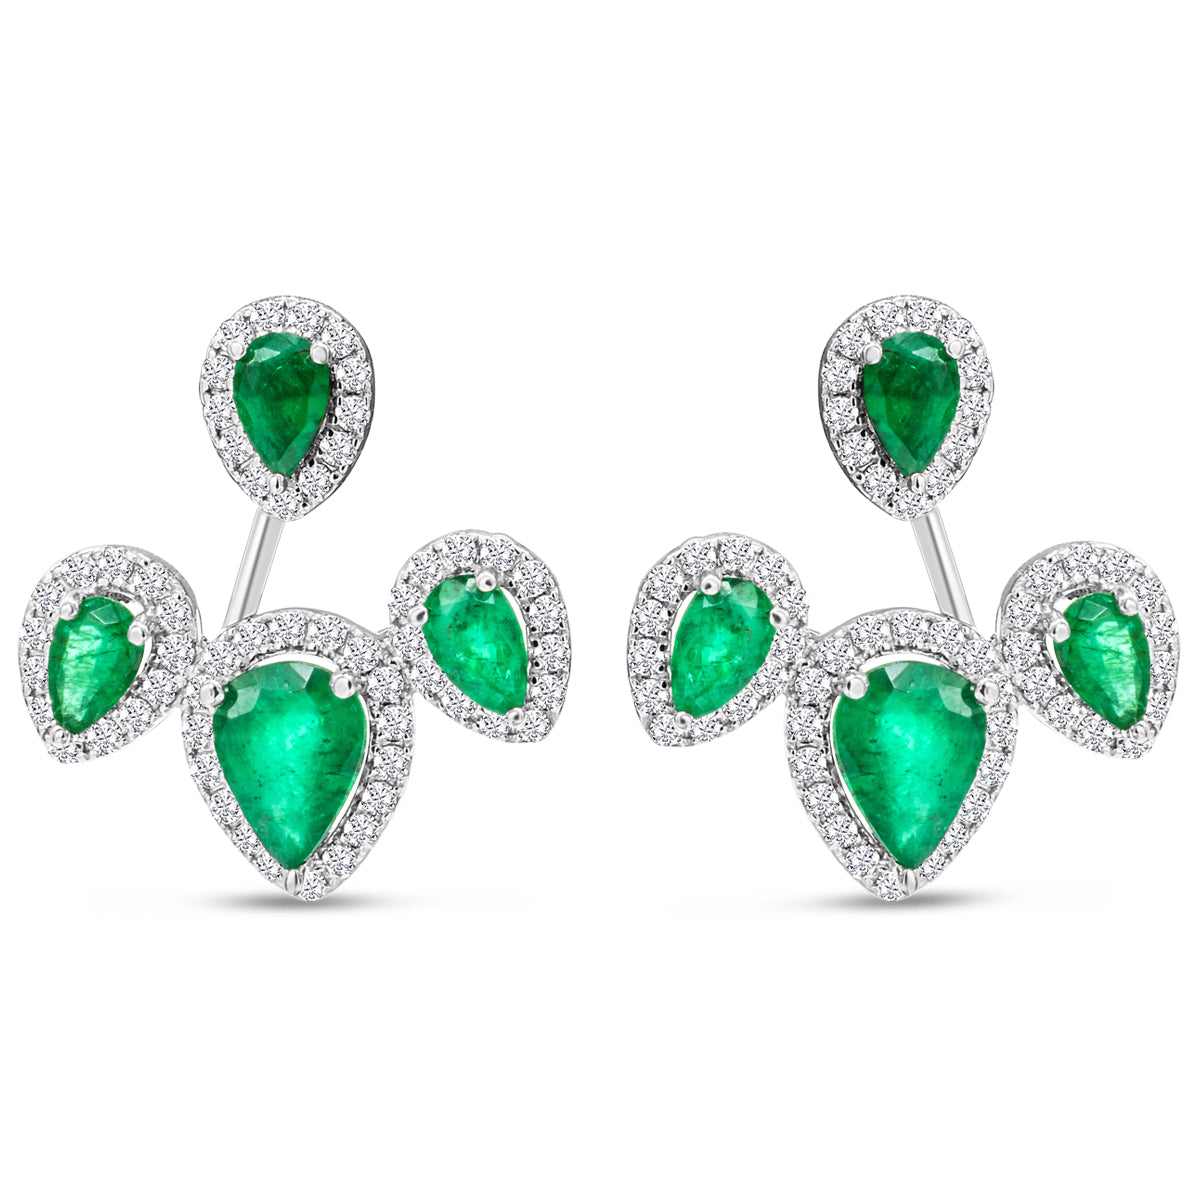 Sselects 3 Carat Emerald And Diamond Drop Earrings In 14 Karat White I-j, I1-i2 In Gold